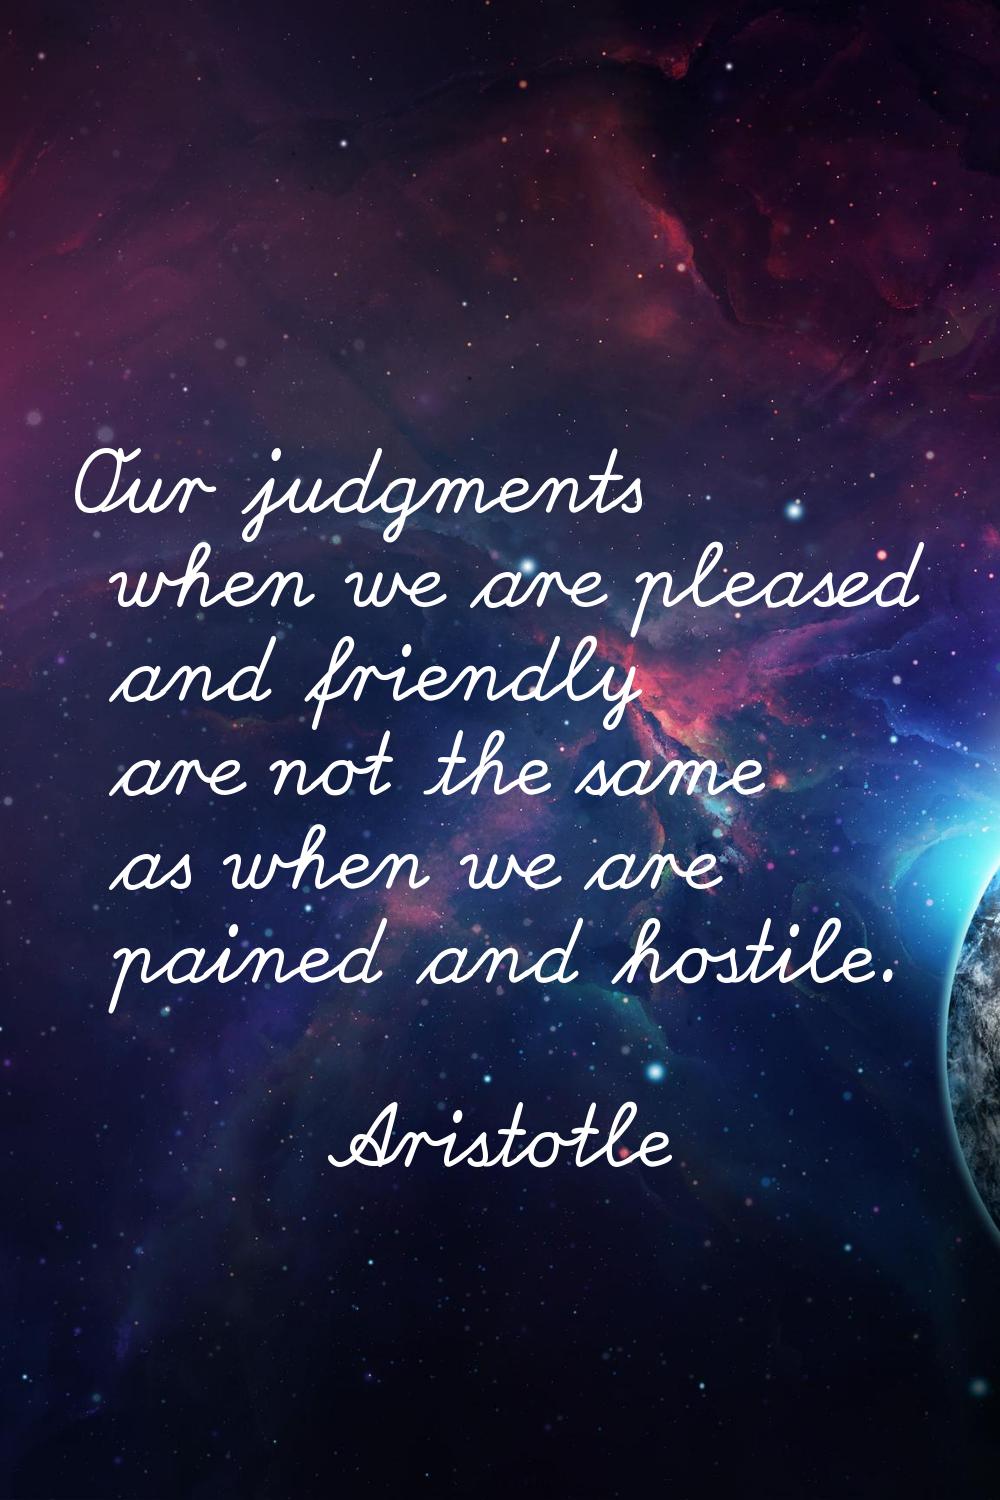 Our judgments when we are pleased and friendly are not the same as when we are pained and hostile.